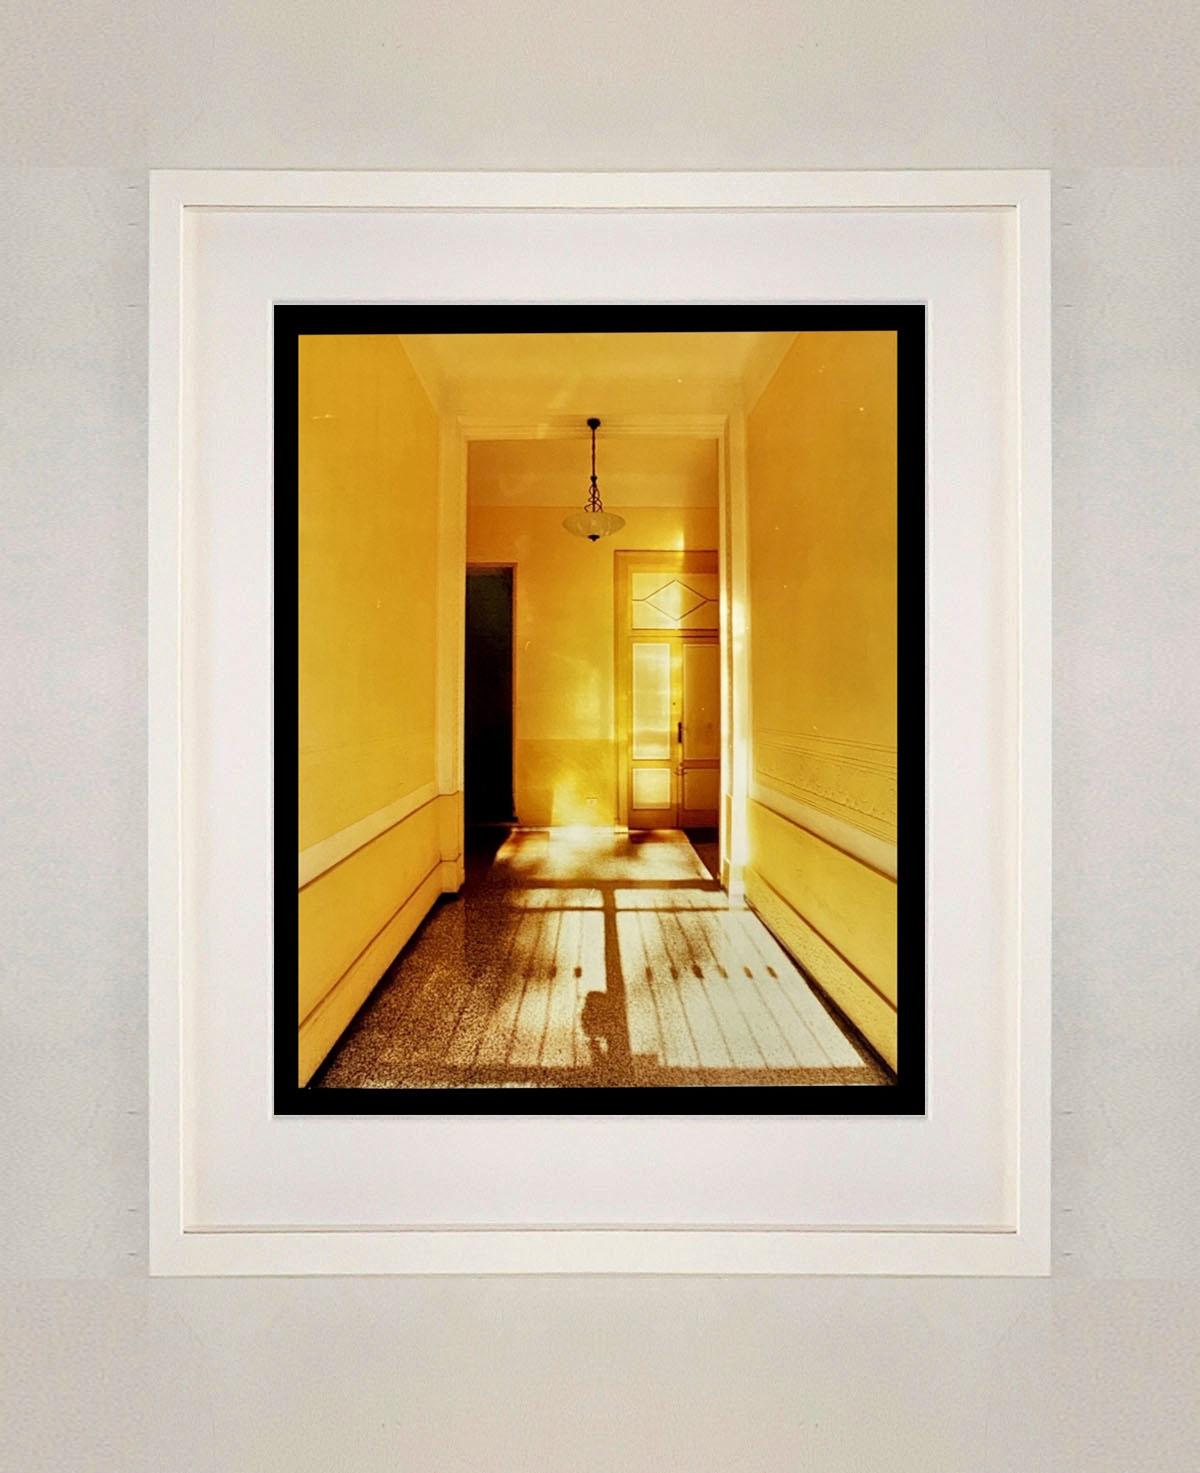 Yellow Corridor Night, from Richard Heeps series, 'A Short History of Milan' which began in November 2018 for a special project featuring at the Affordable Art Fair Milan 2019 and the series is ongoing.
There is a reoccurring linear, structural